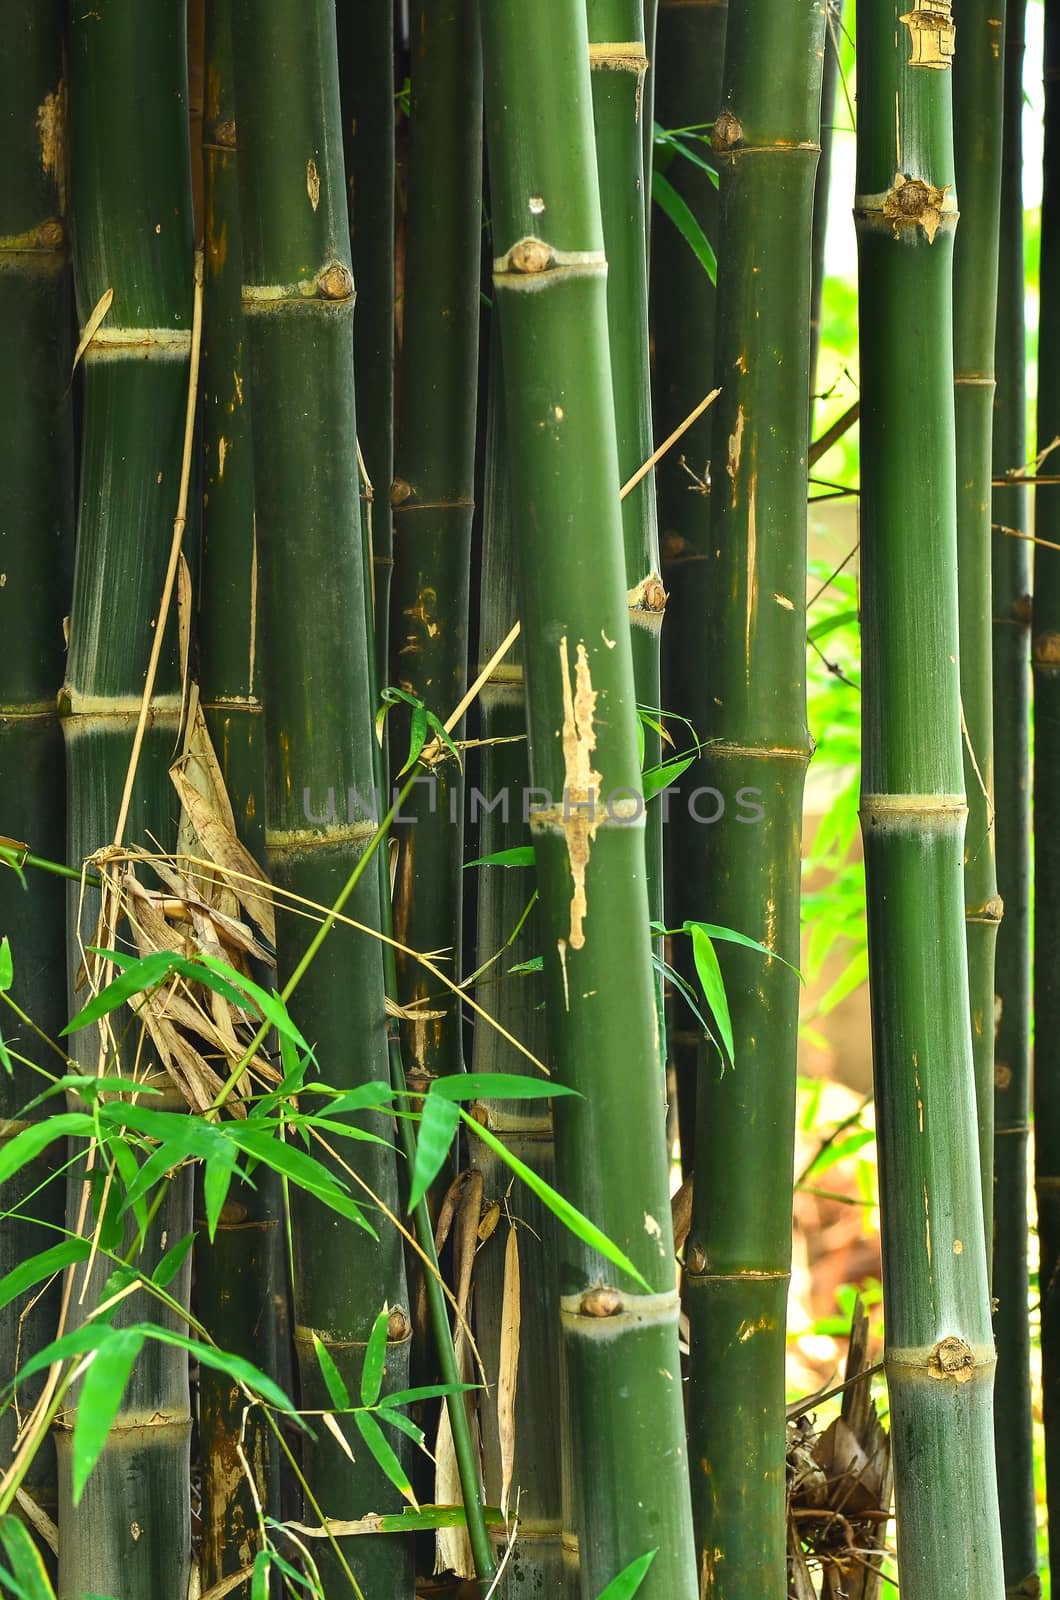 Bamboo by raweenuttapong